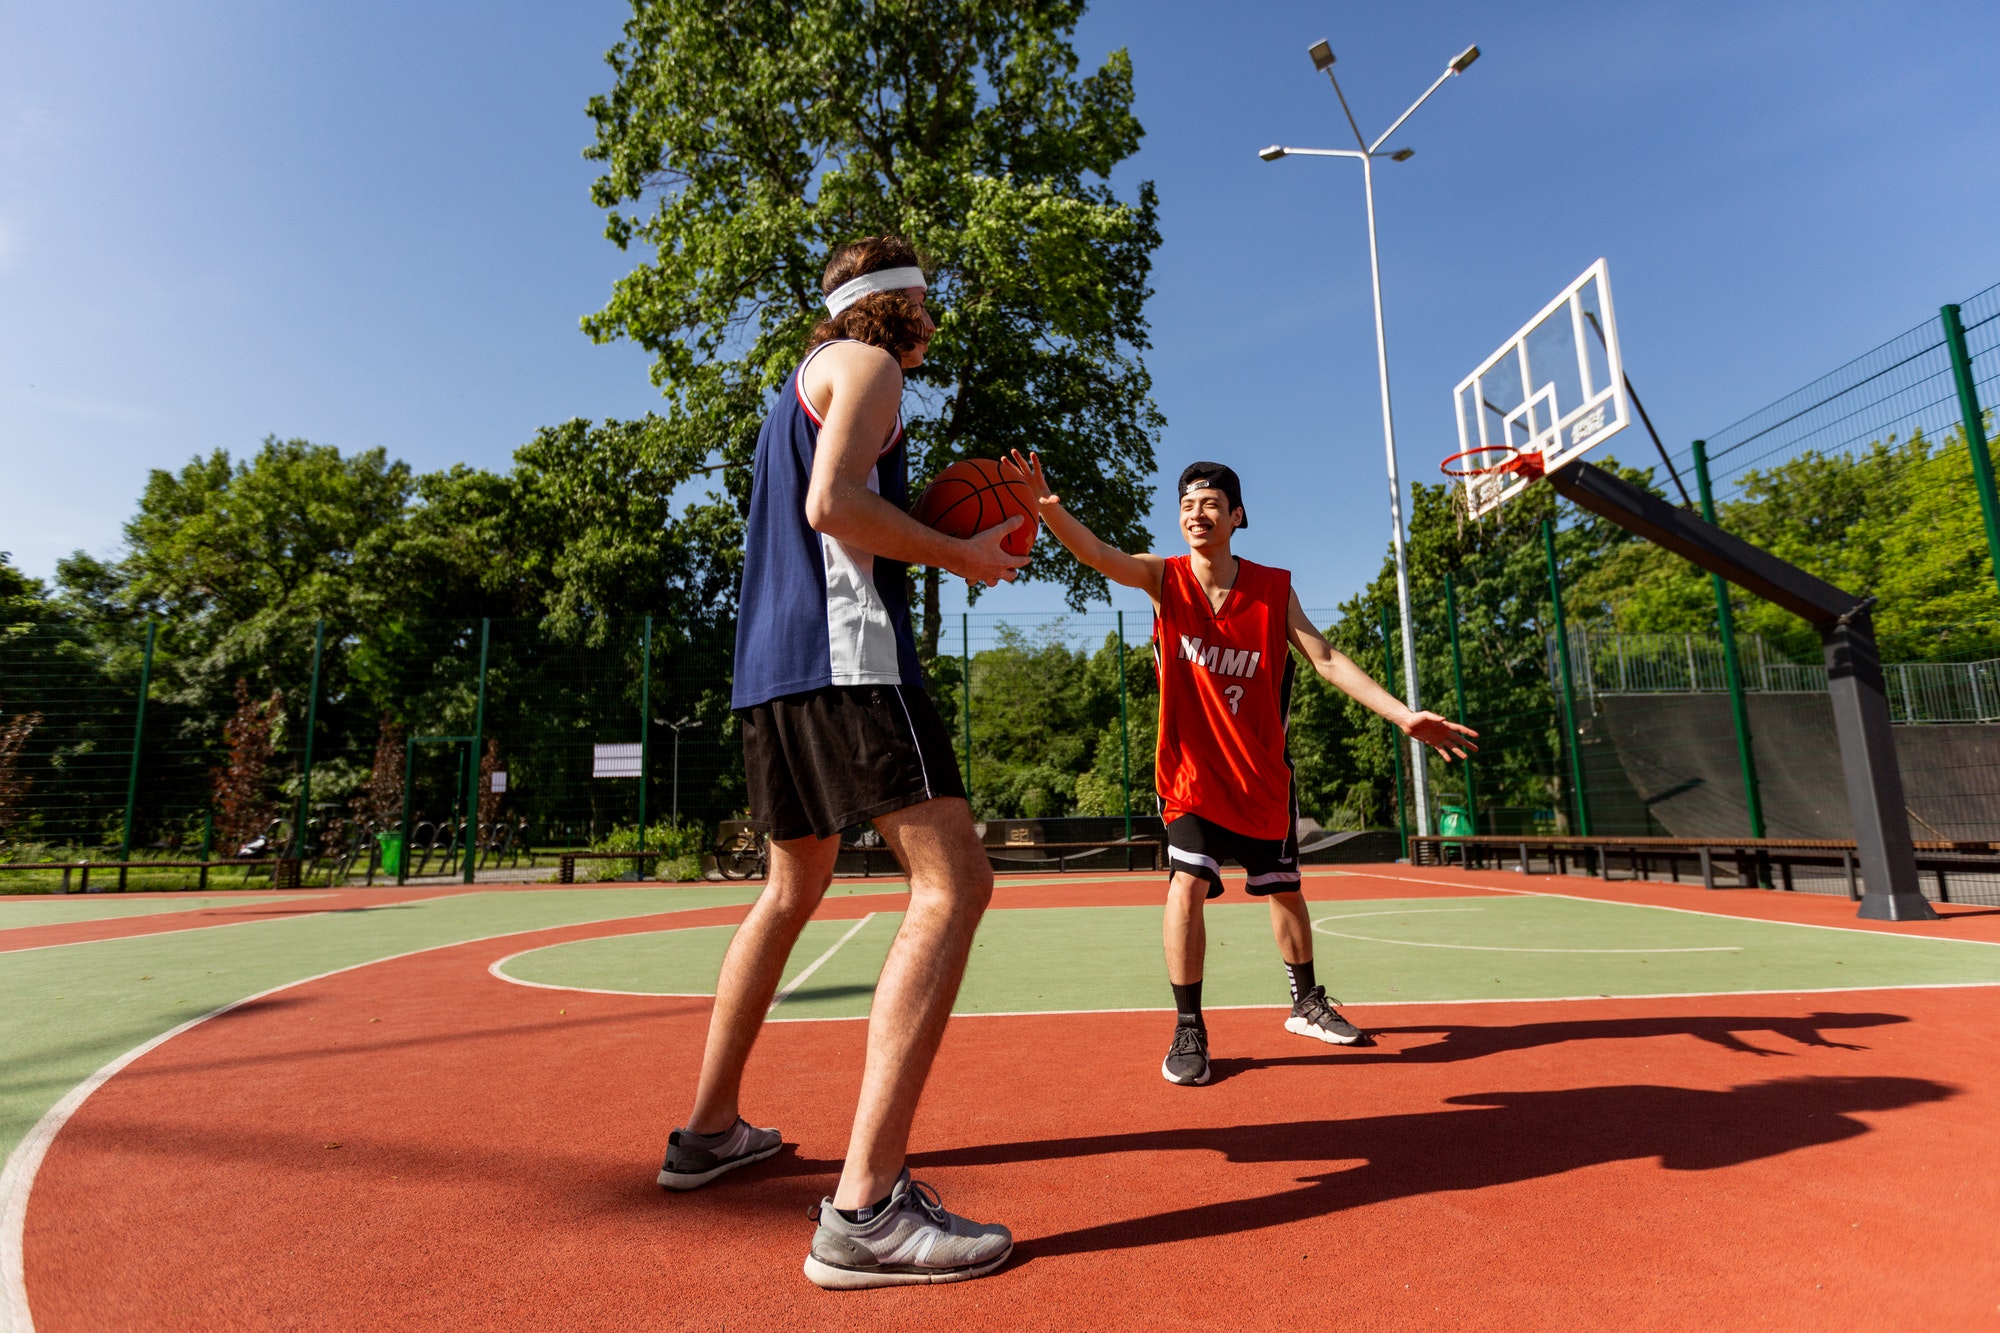 Two millennial sportsmen playing basketball match at outdoor playground, blank space